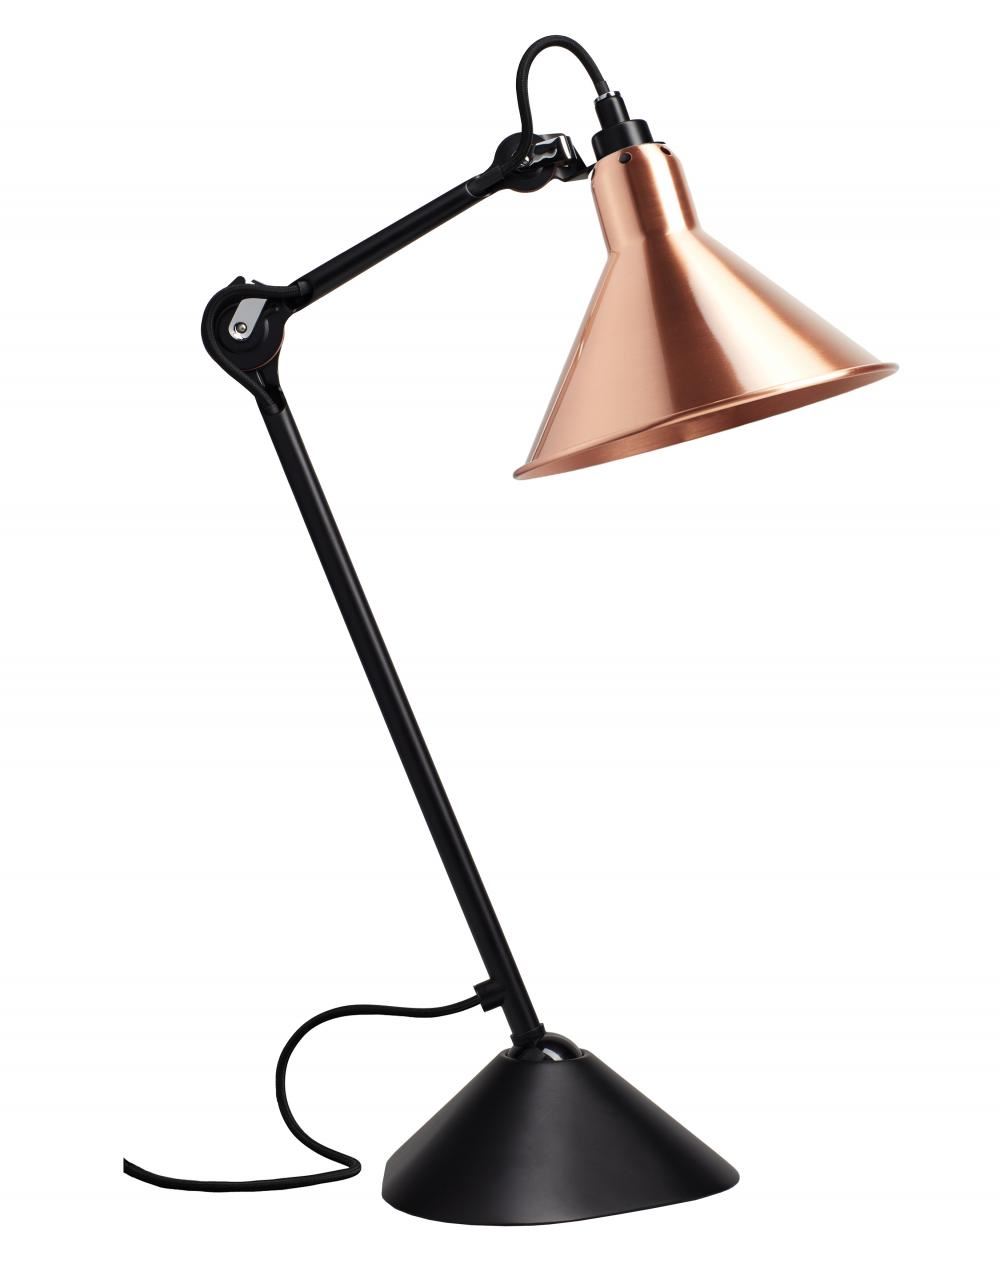 Lampe Gras 205 Table Lamp Satin Black Arm Copper Shade With White Interior Conic